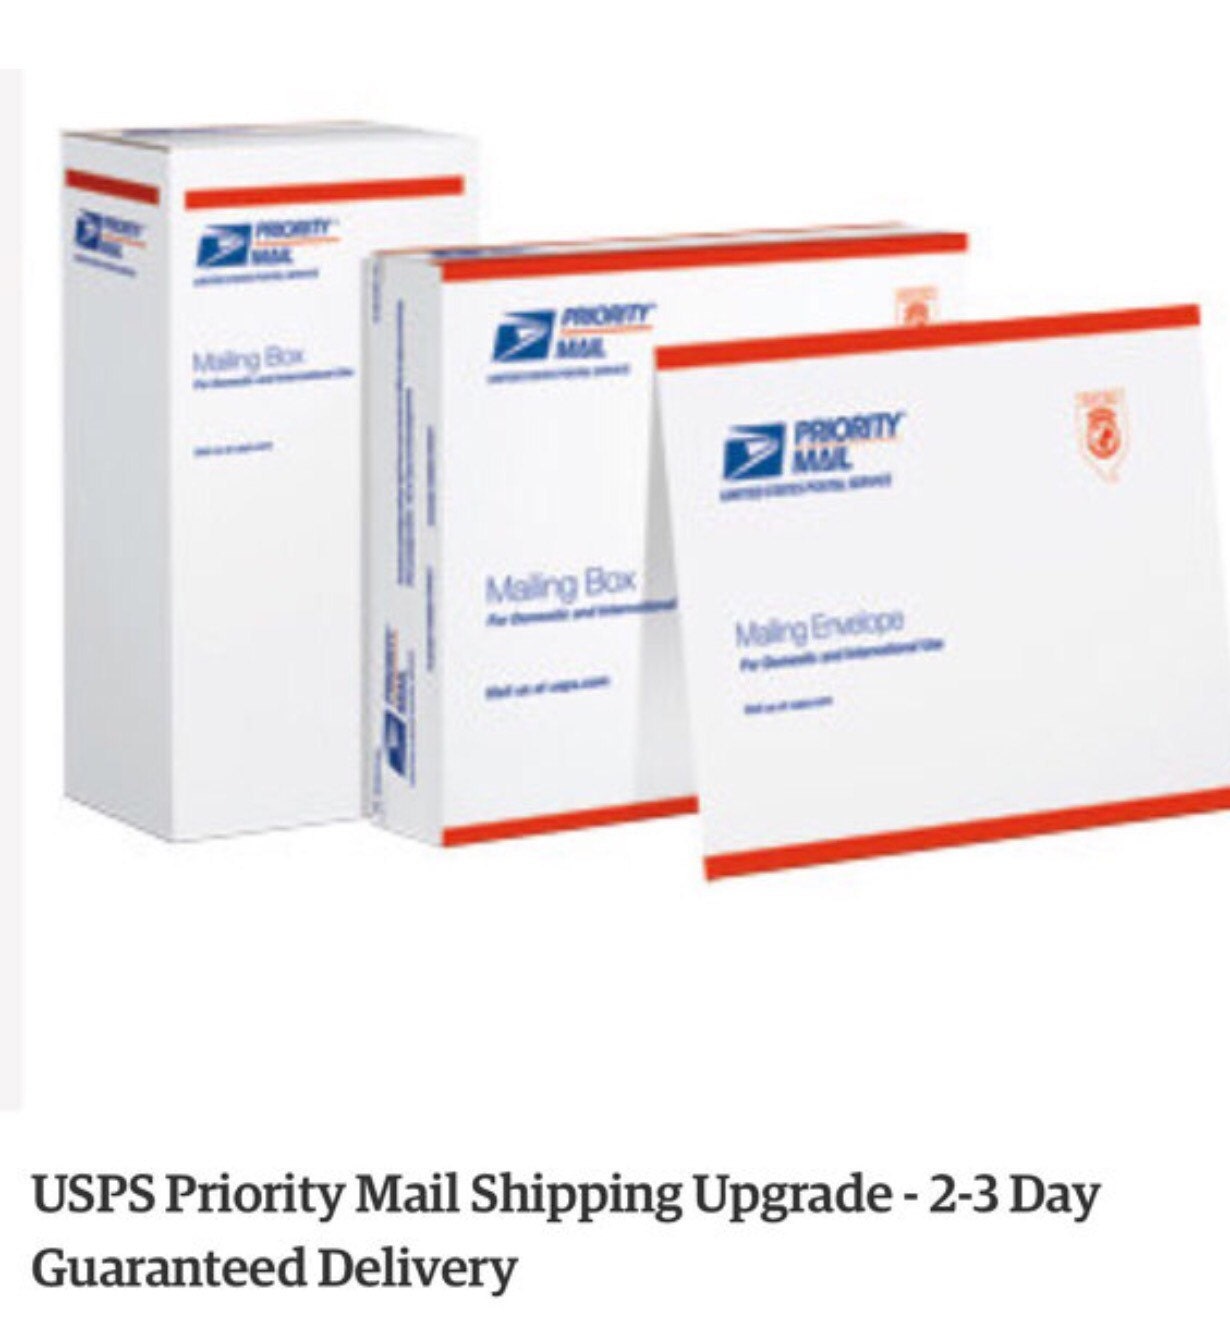 Usps Priority Shipping 2 3 Day Upgrade By Littleheartsco On Etsy 8258